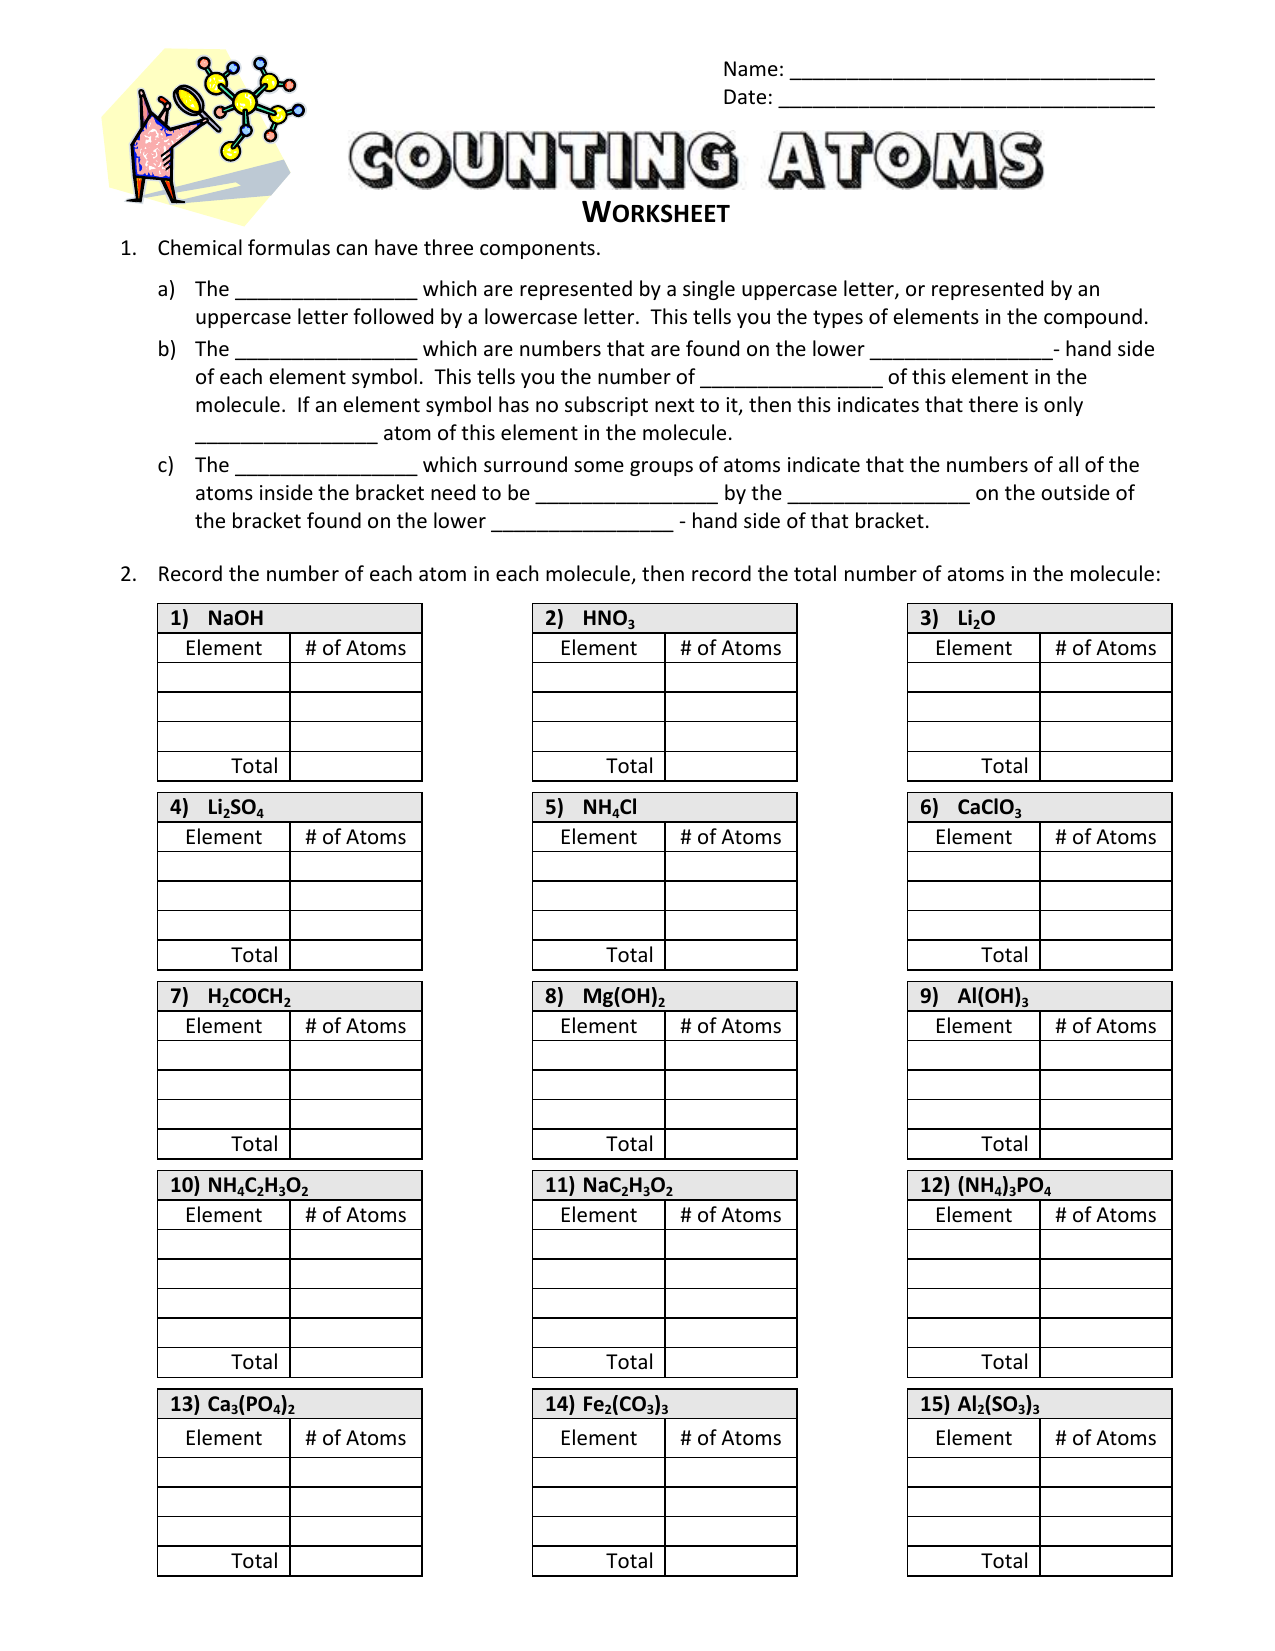 Counting Atoms - Worksheet Within Counting Atoms Worksheet Answer Key